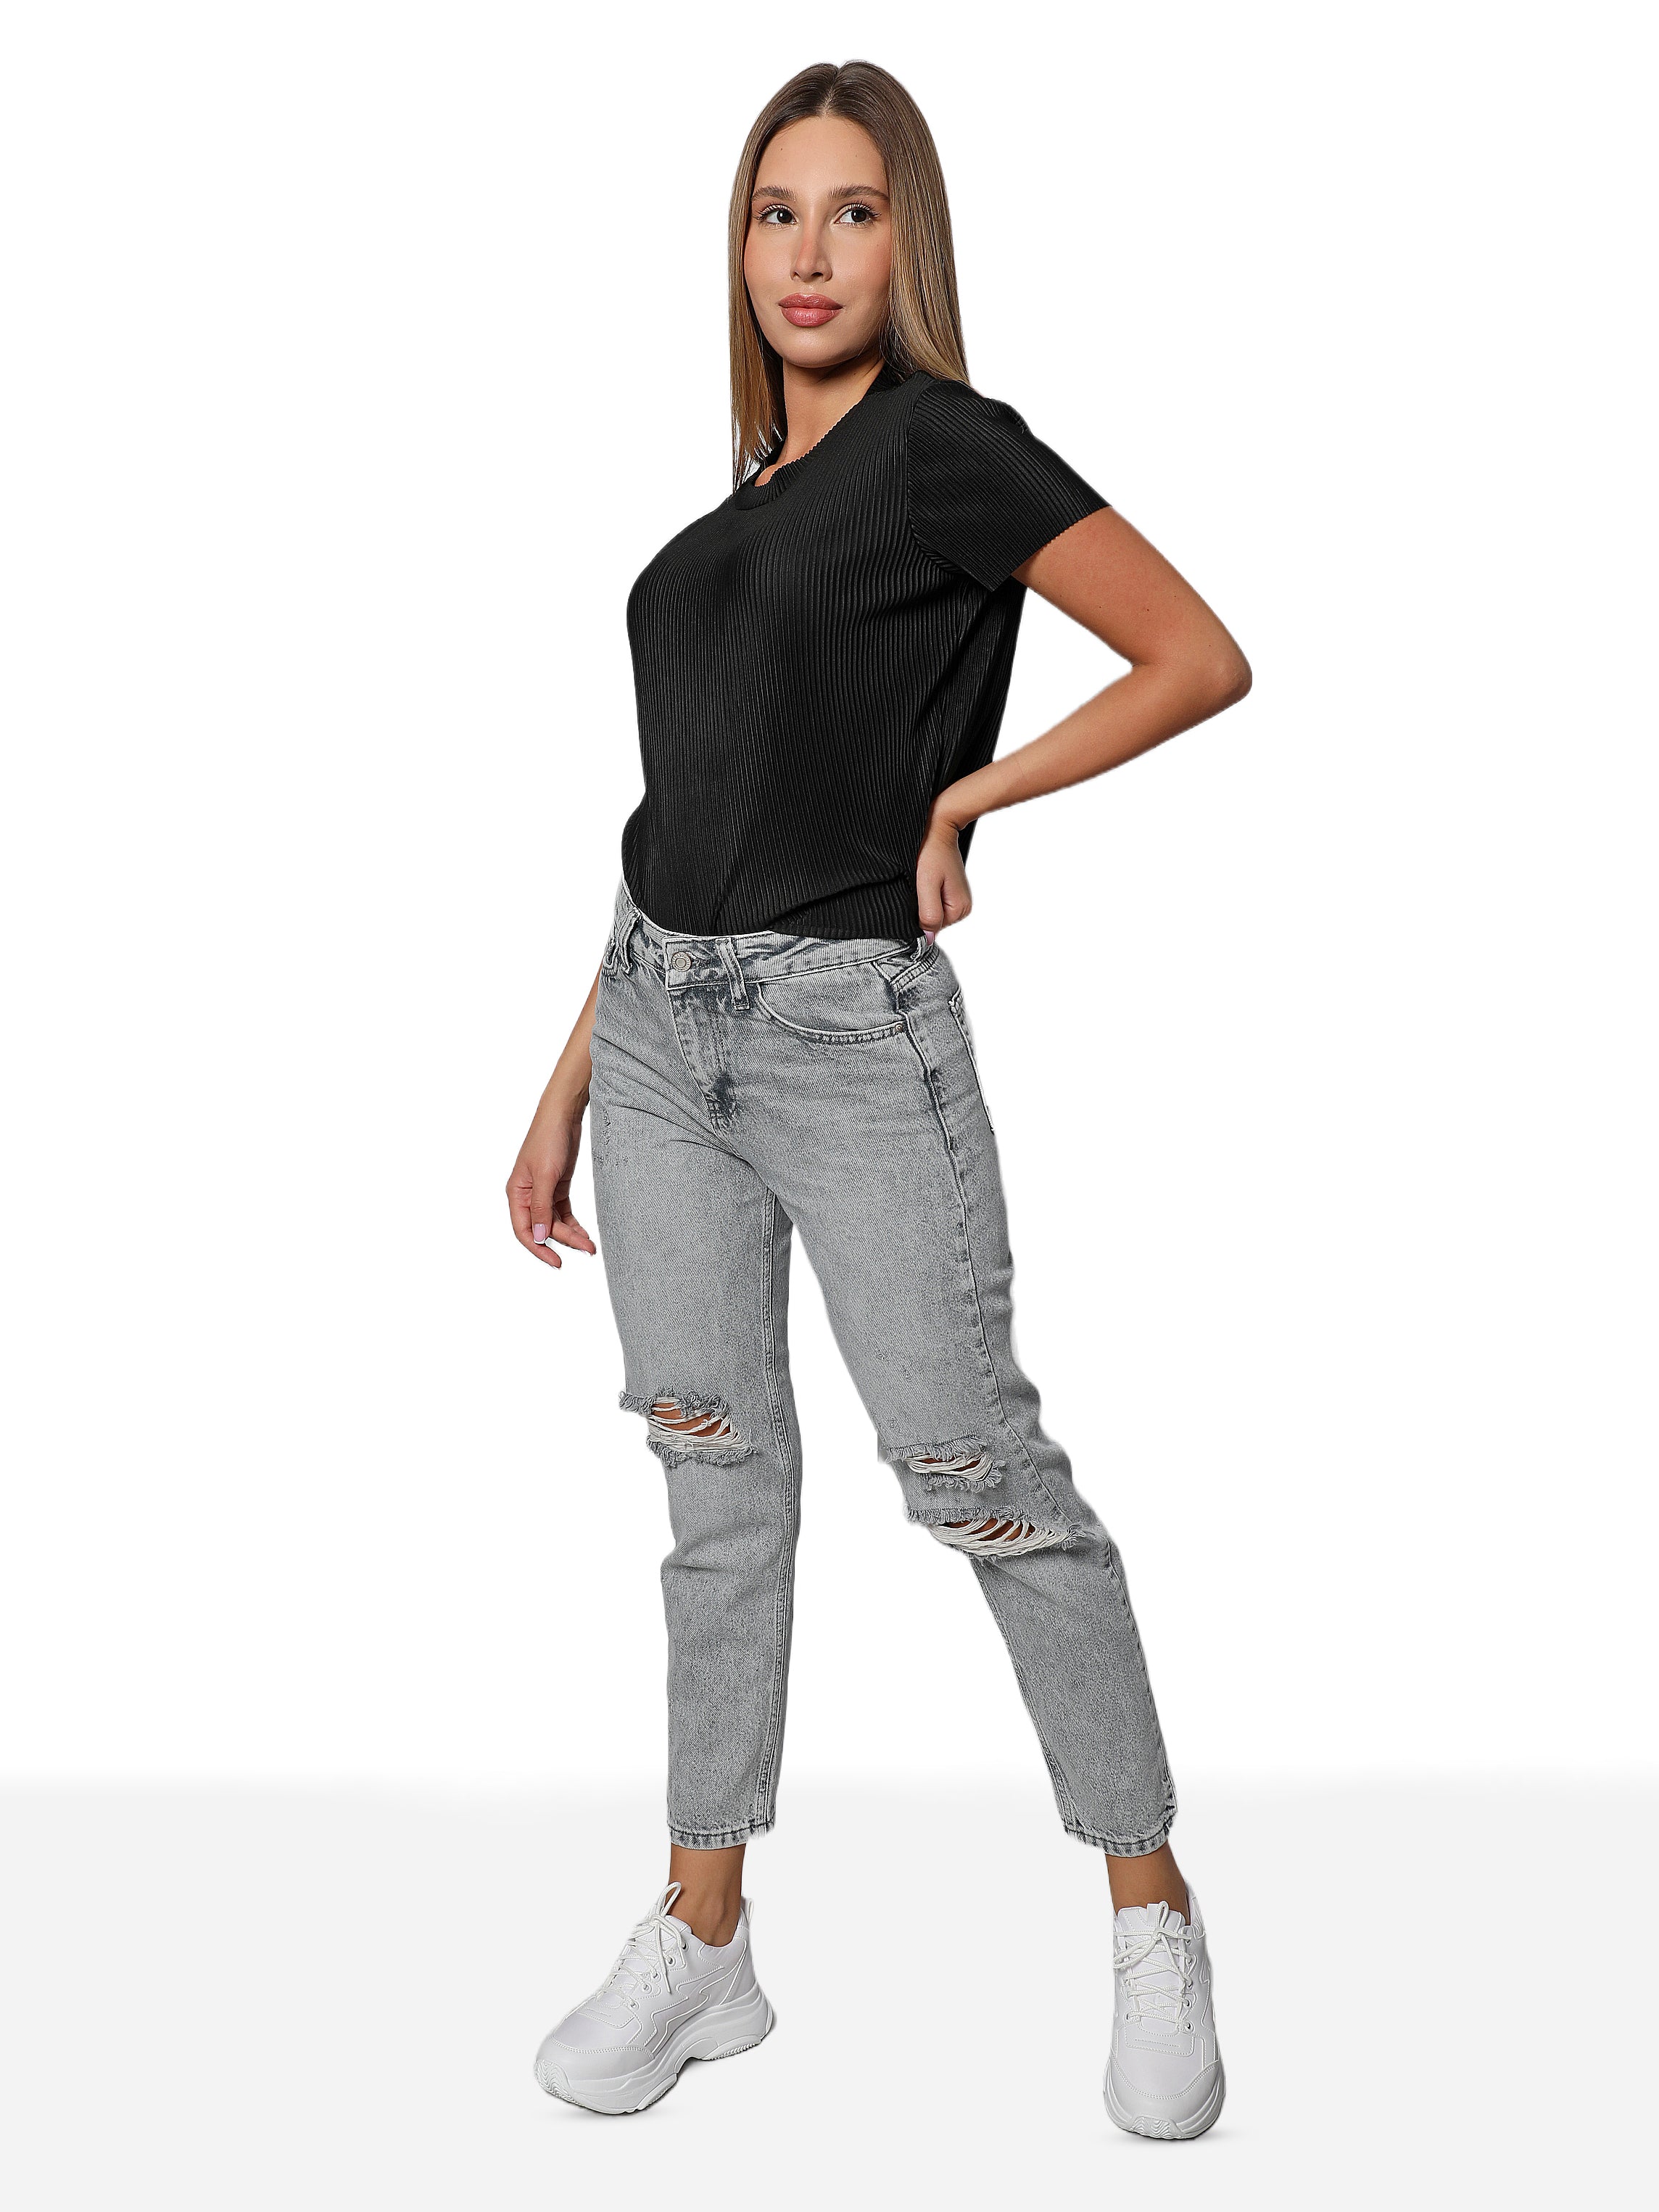 Women Grey Denim Jeans With Ripped Design